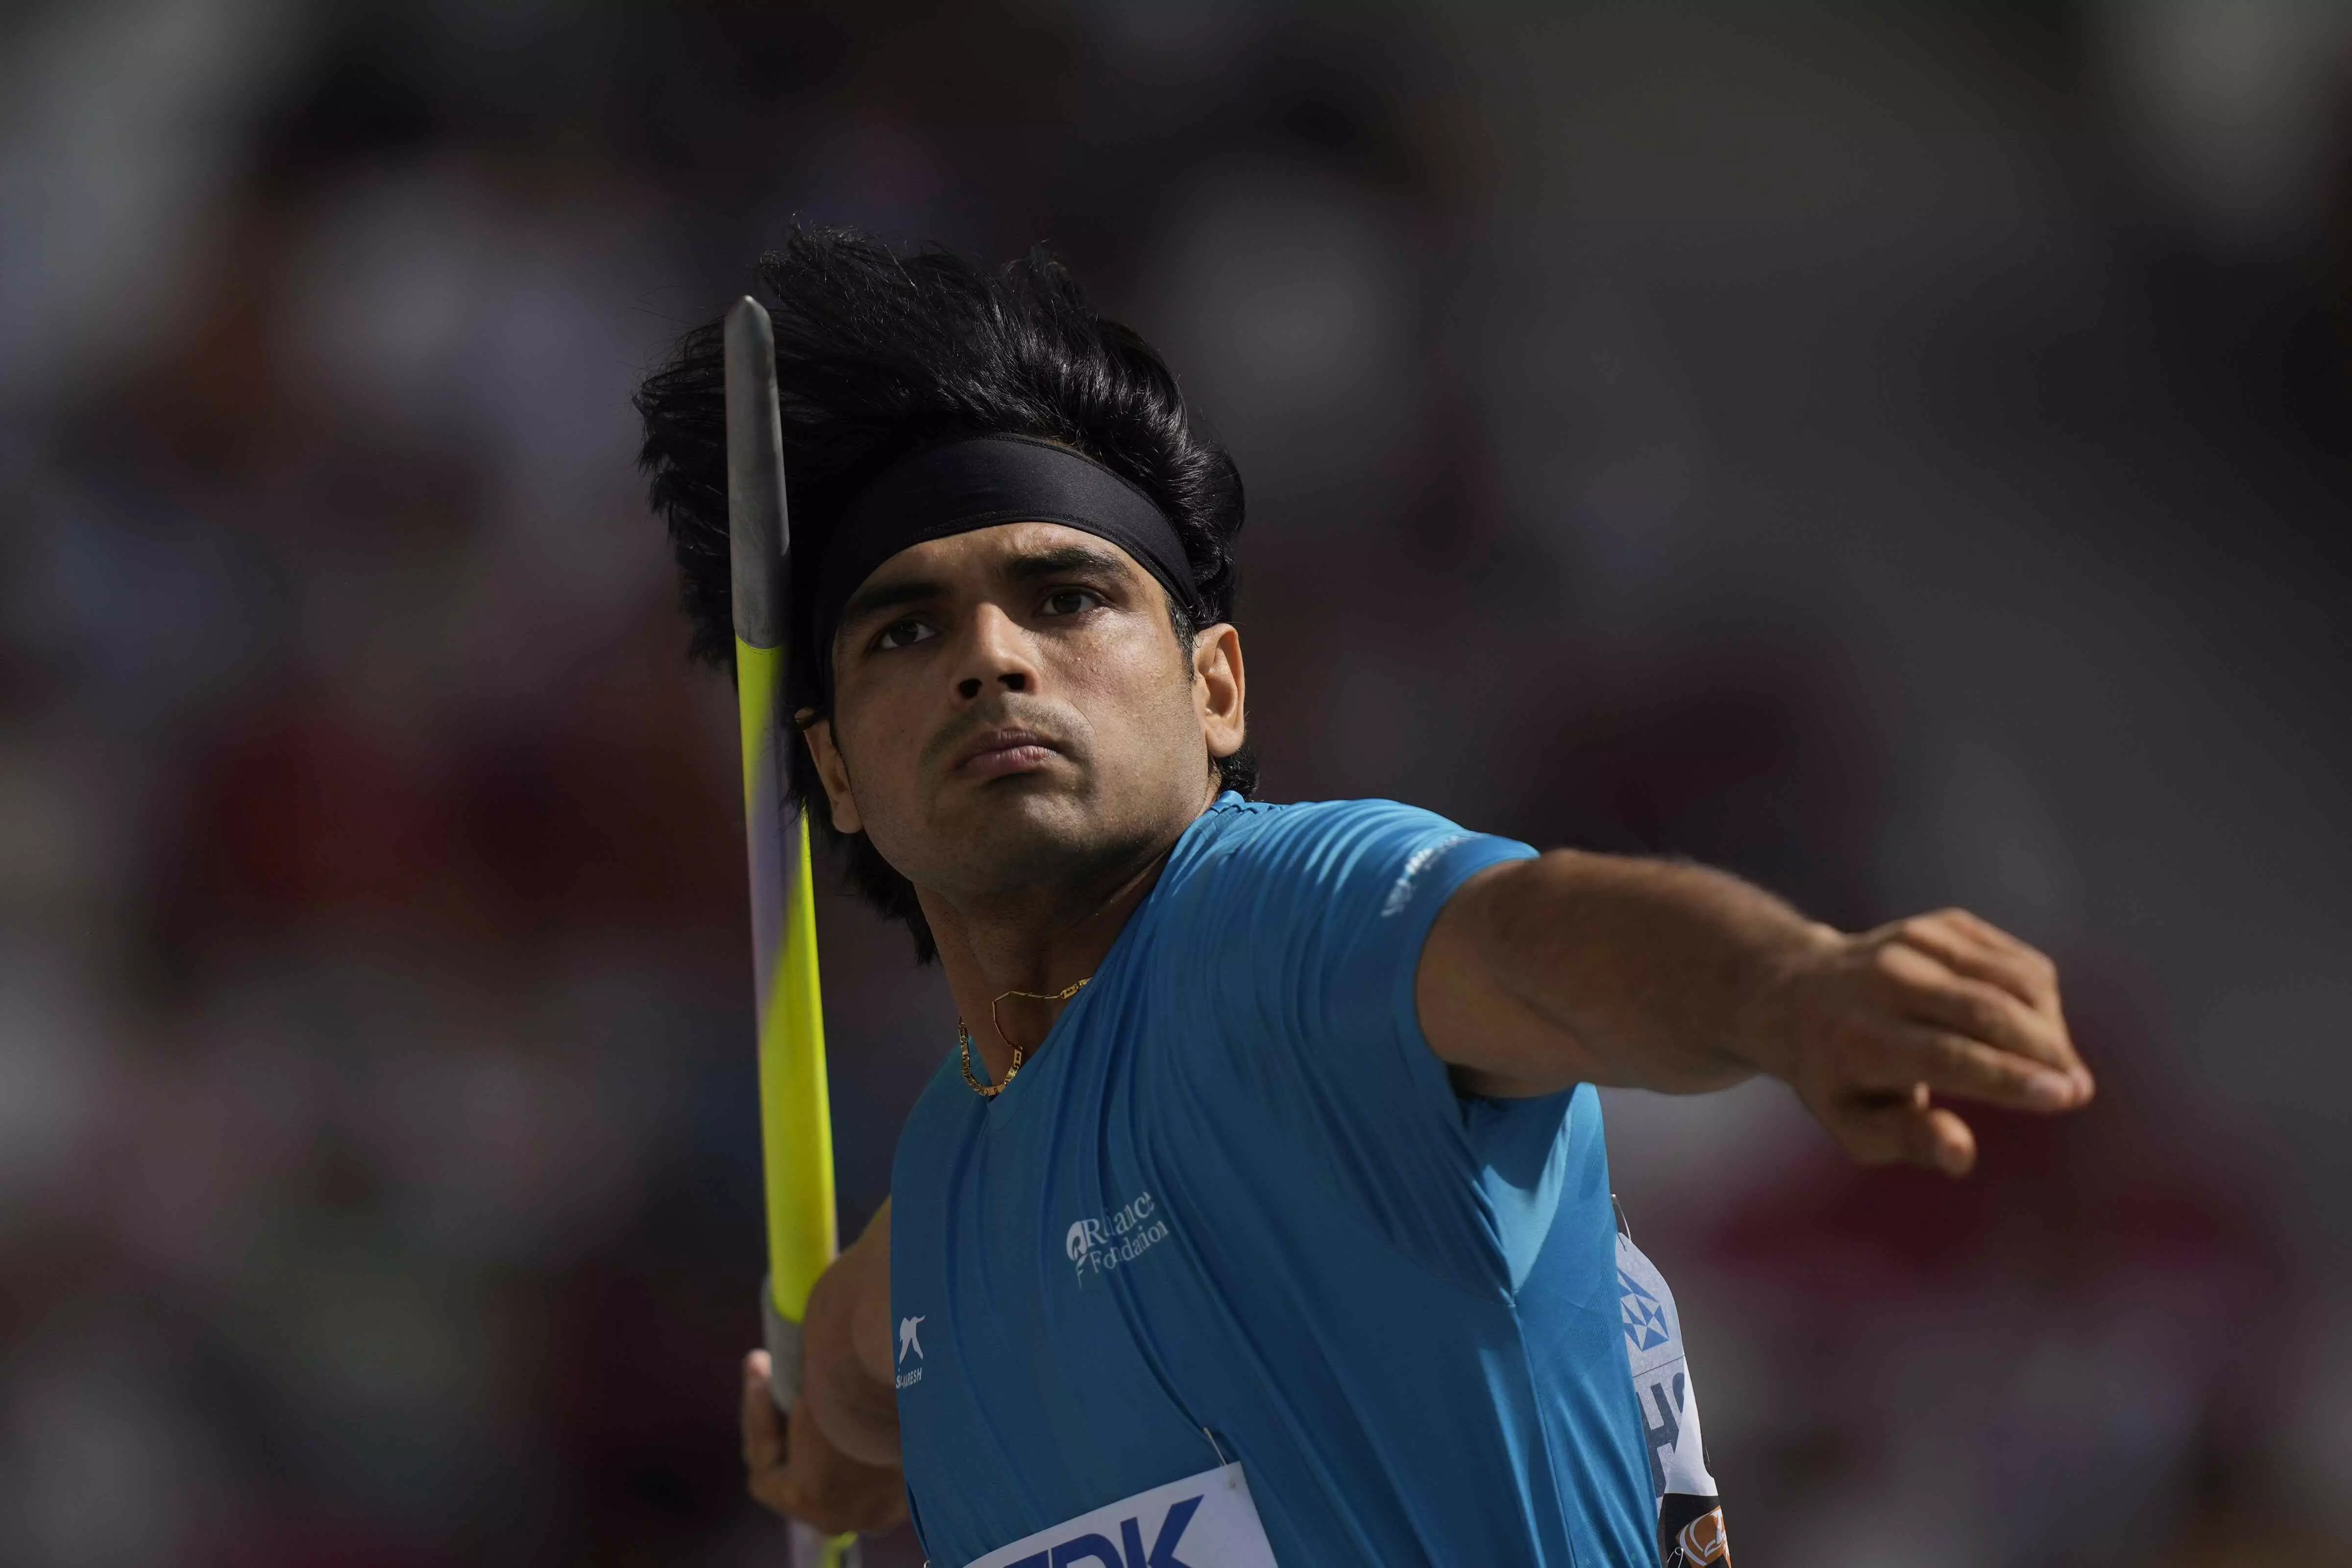 Neeraj Chopra creates history, becomes first Indian to win gold medal in World Athletics Championships